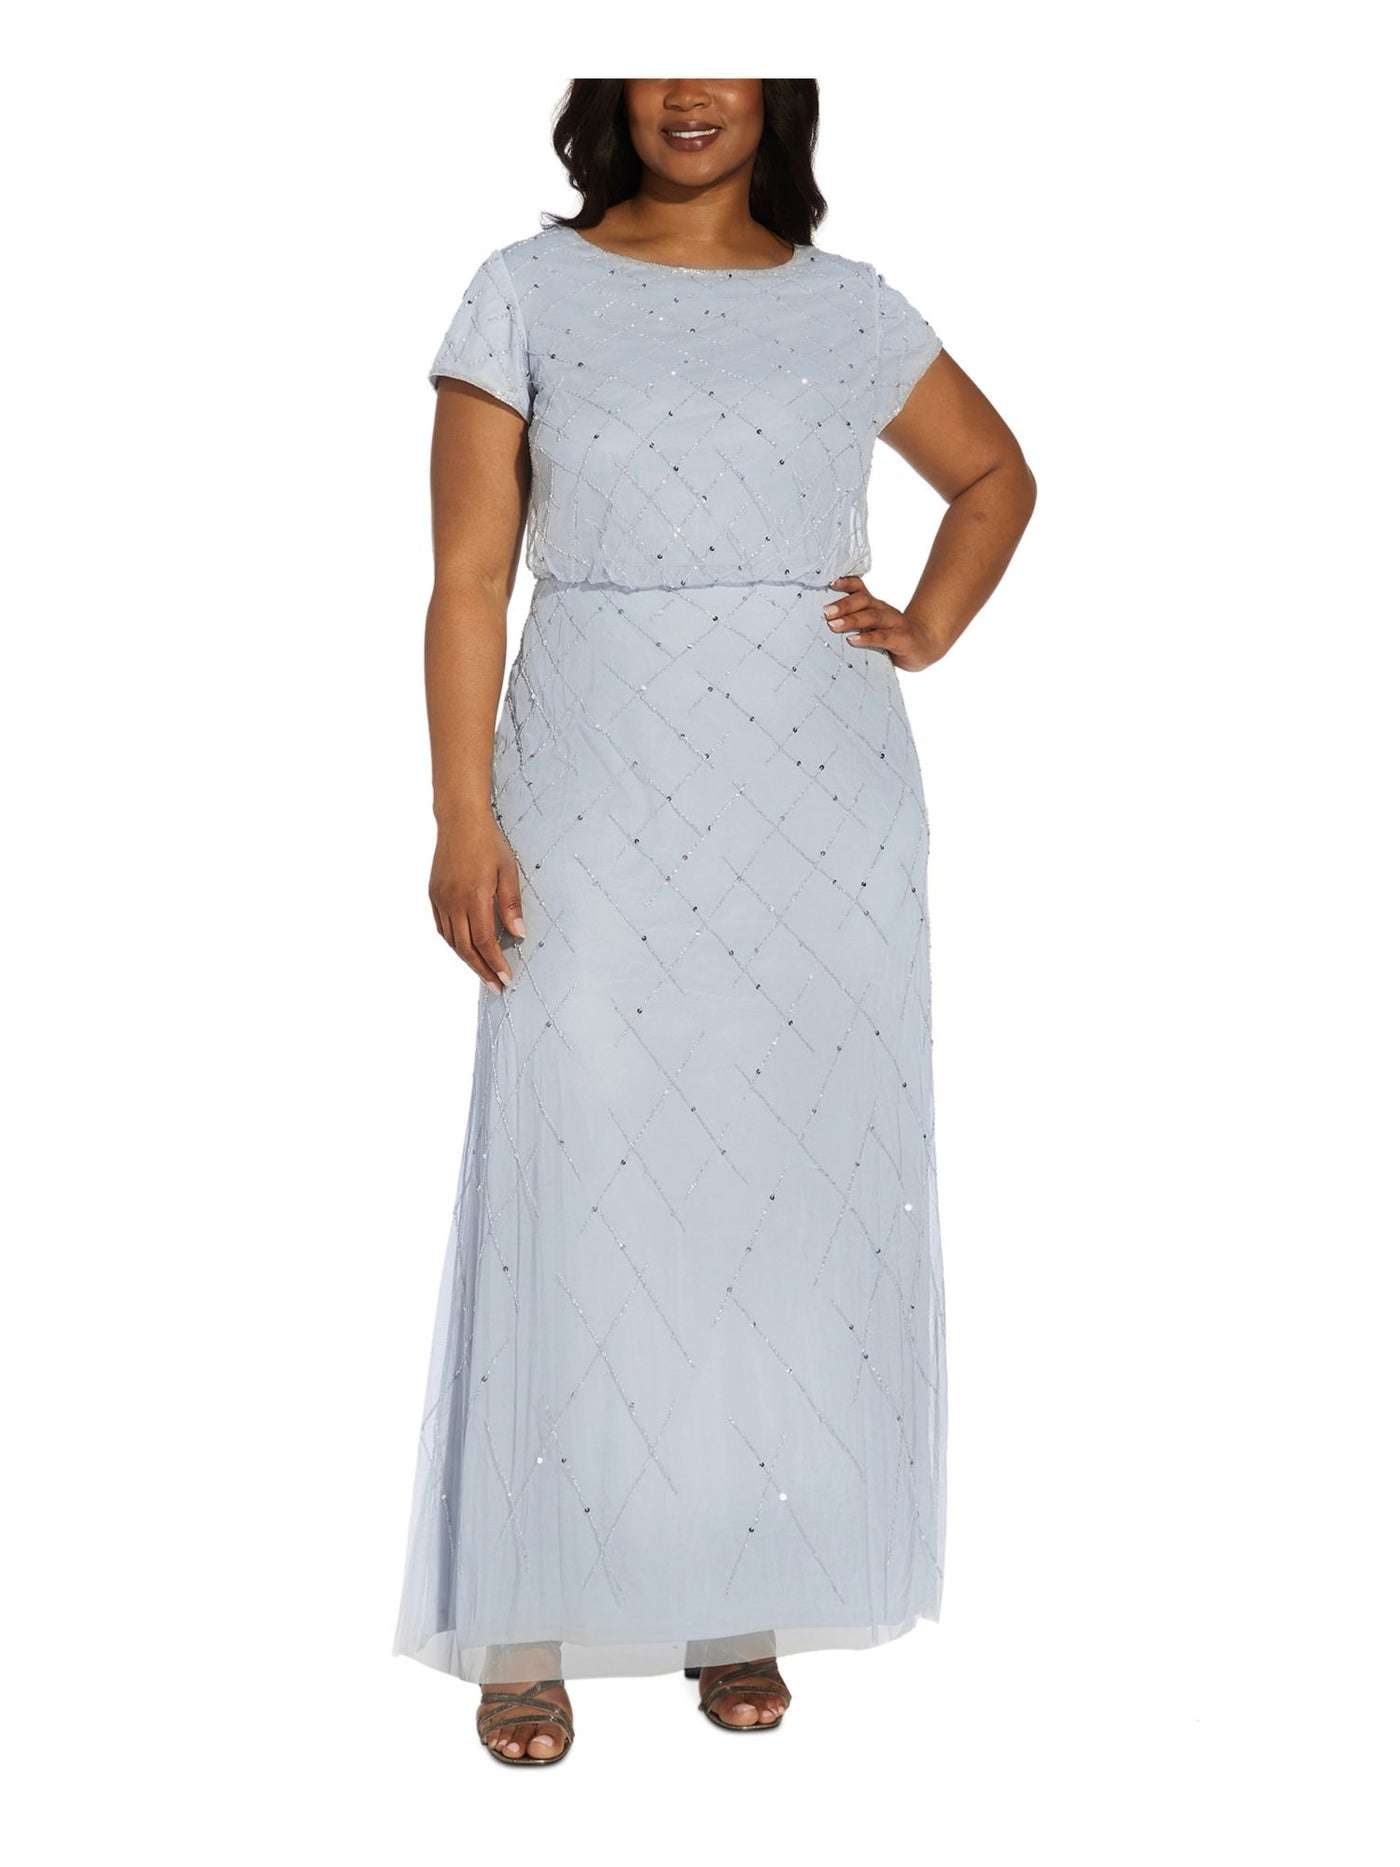 ADRIANNA PAPELL Womens Light Blue Beaded Sequined Zippered Short Sleeve Scoop Neck Full-Length Party Gown Dress Plus 16W